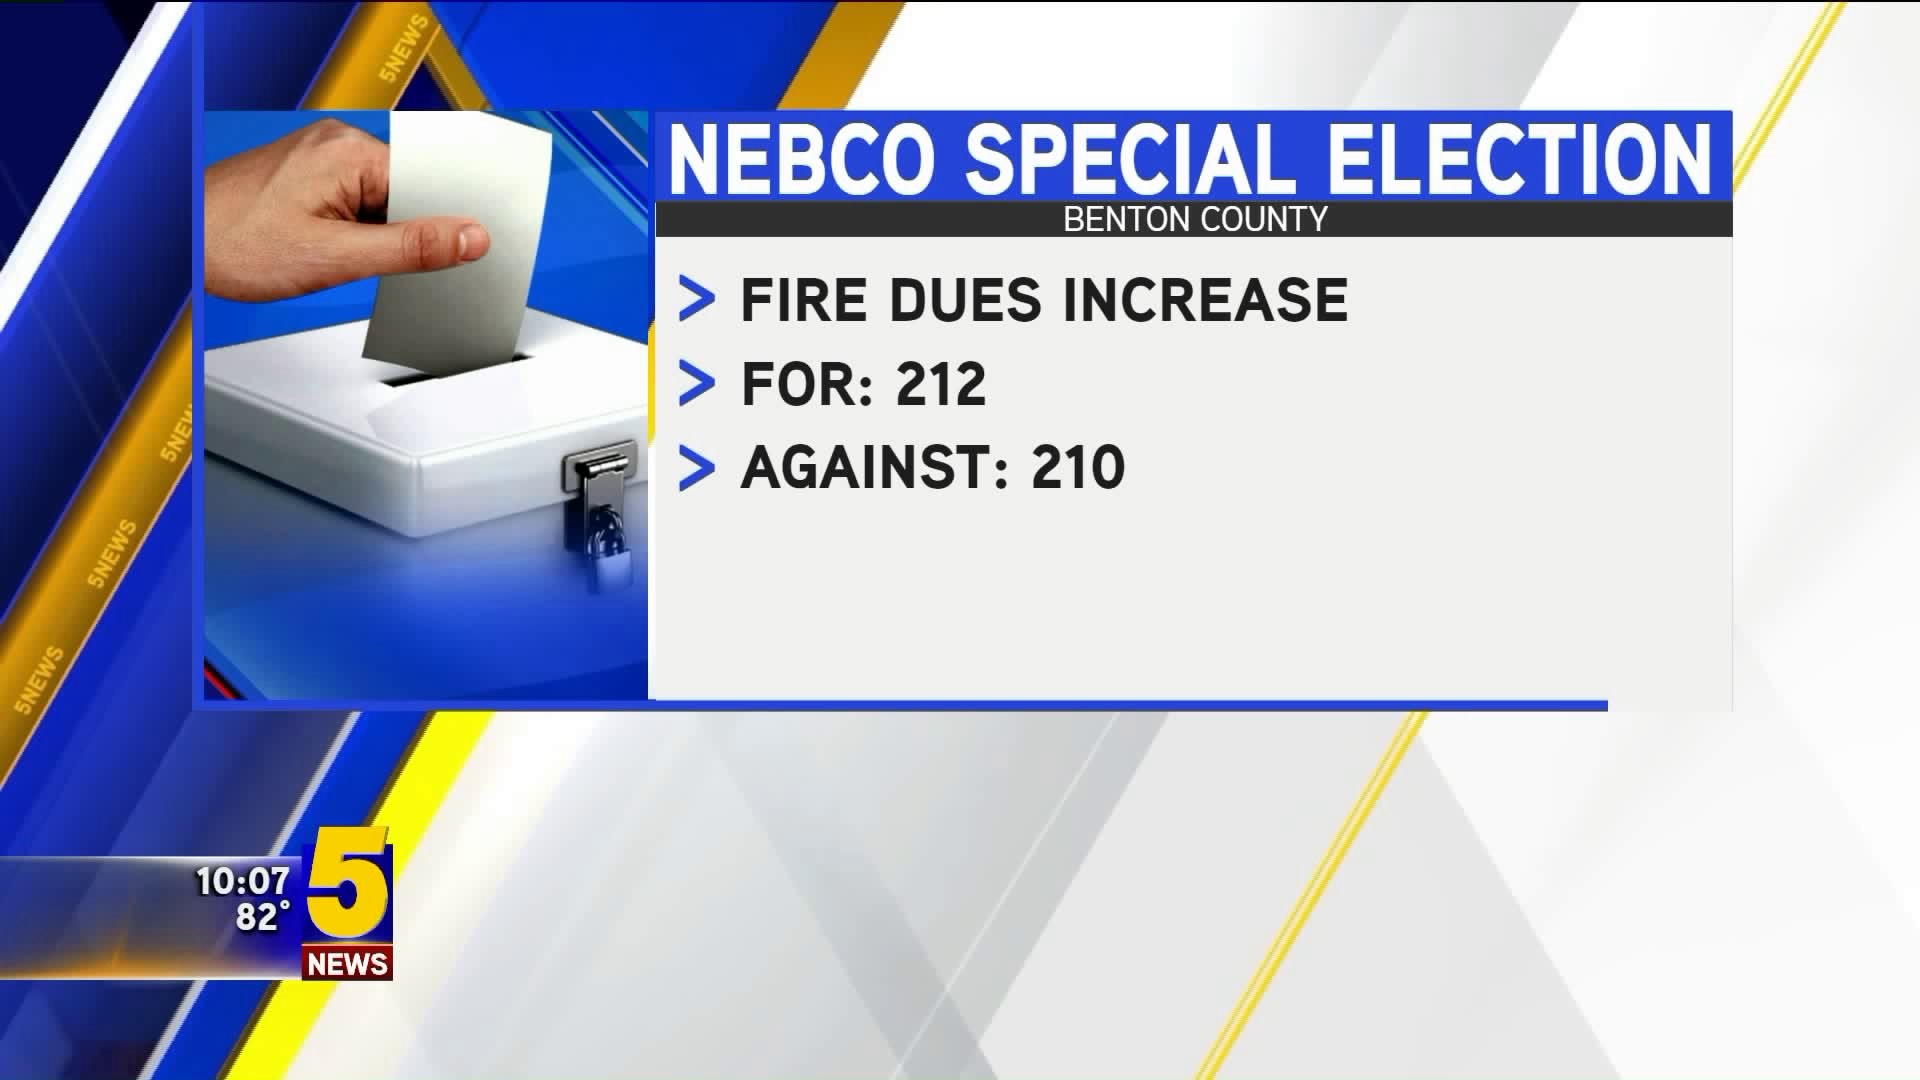 NEBCO Special Election Results